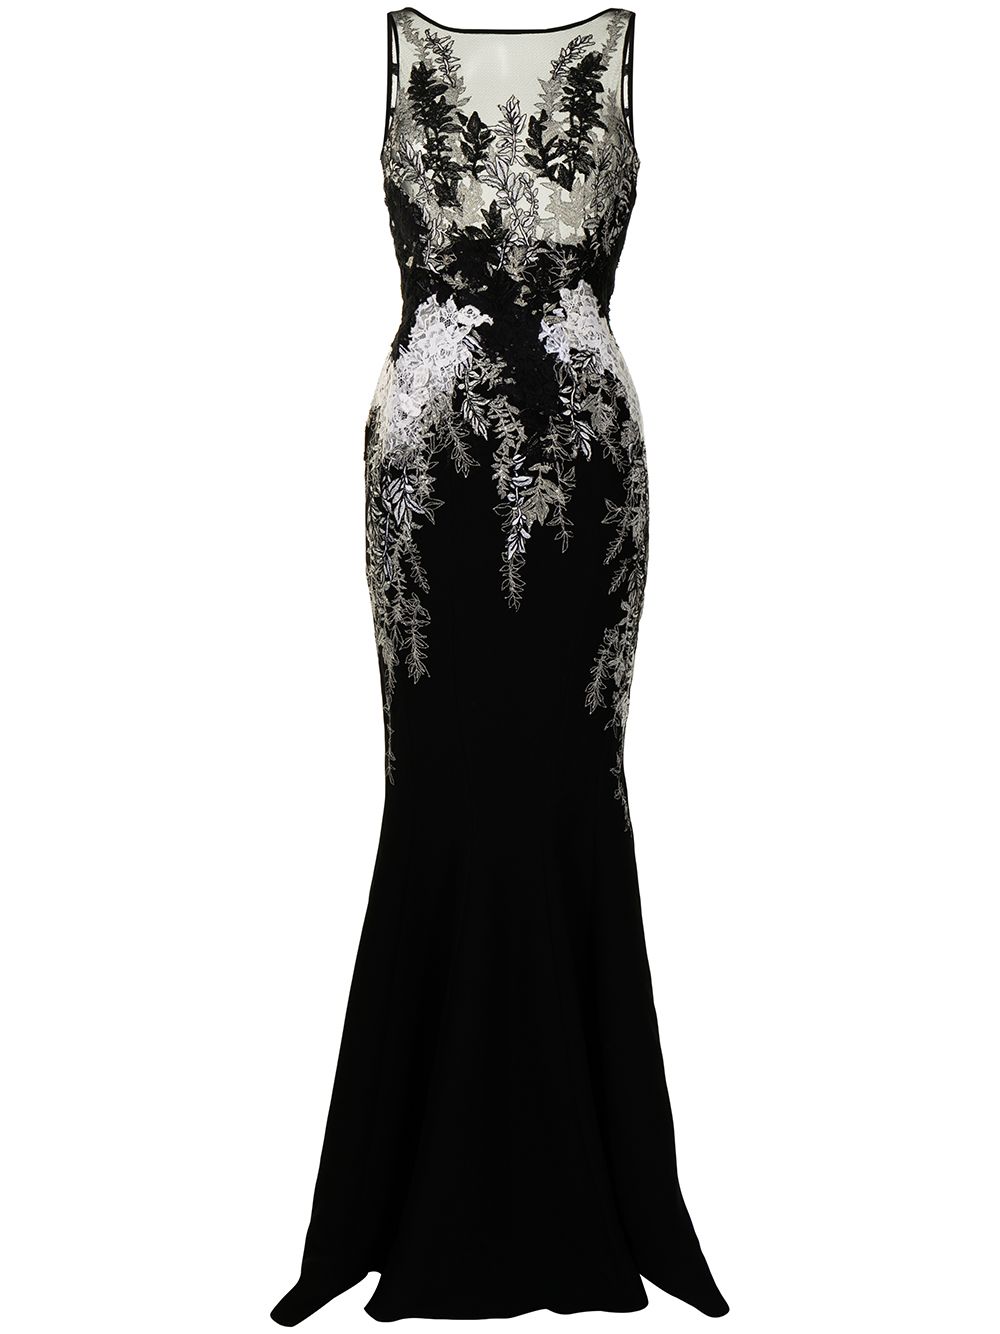 Saiid Kobeisy fitted floral lace-embroidered gown - Black von Saiid Kobeisy